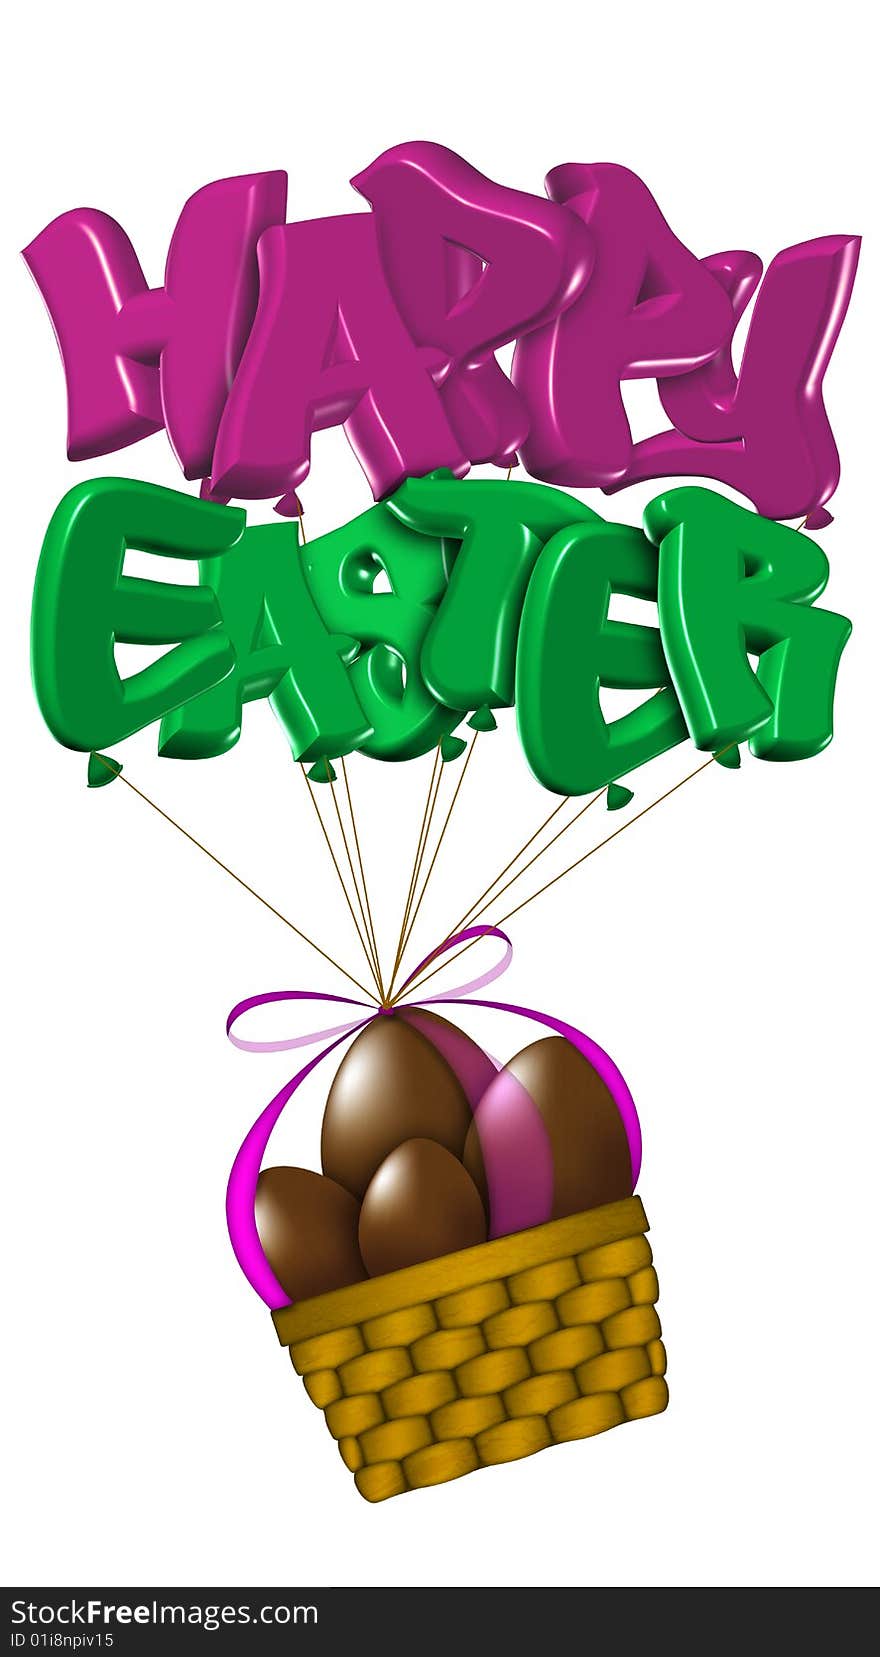 Basket of easter chocolate eggs flying with 3D text balloons, on a white background